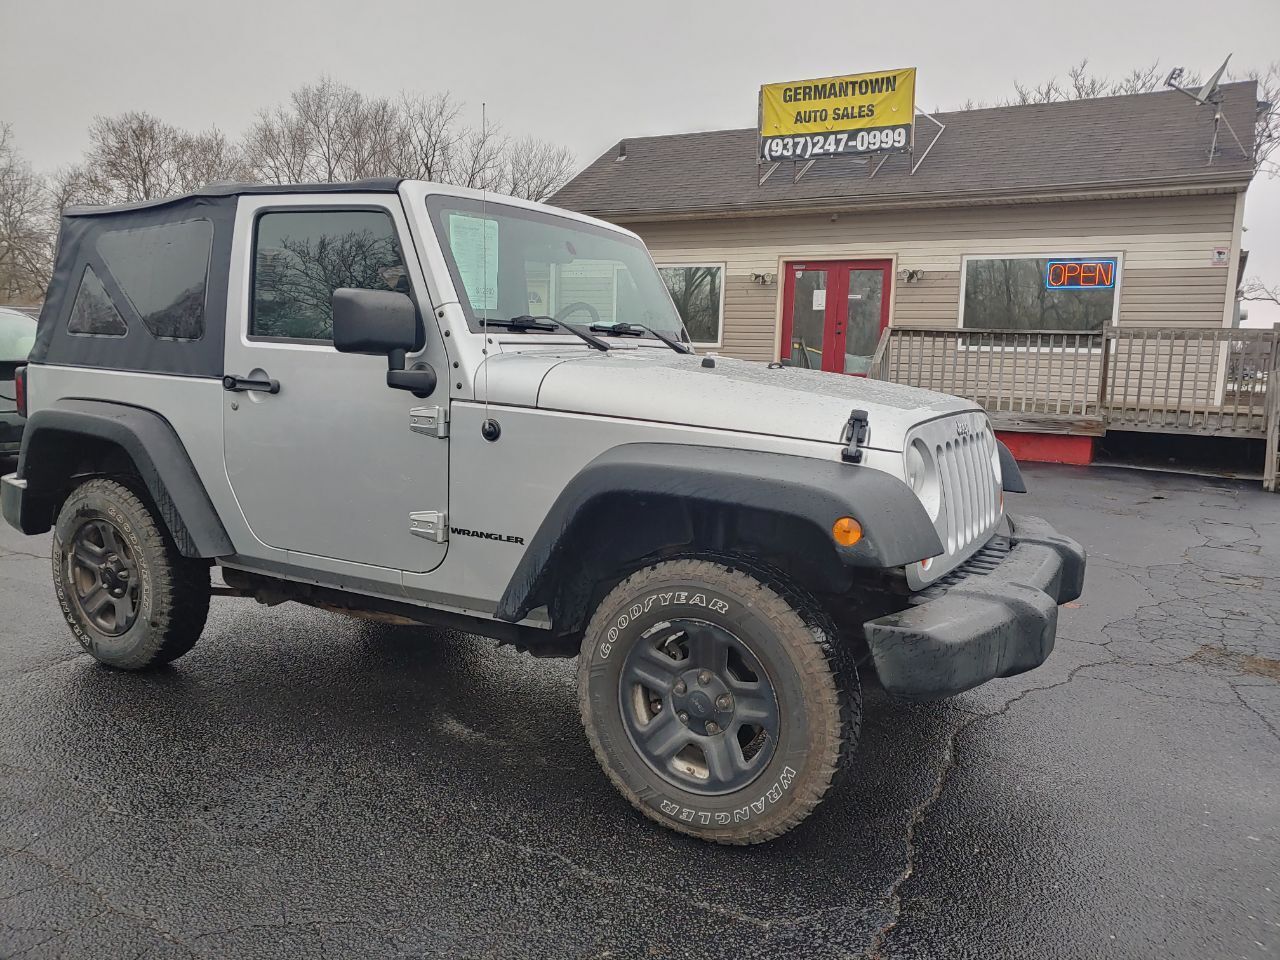 2009 Jeep Wrangler For Sale In Wilmington, OH ®